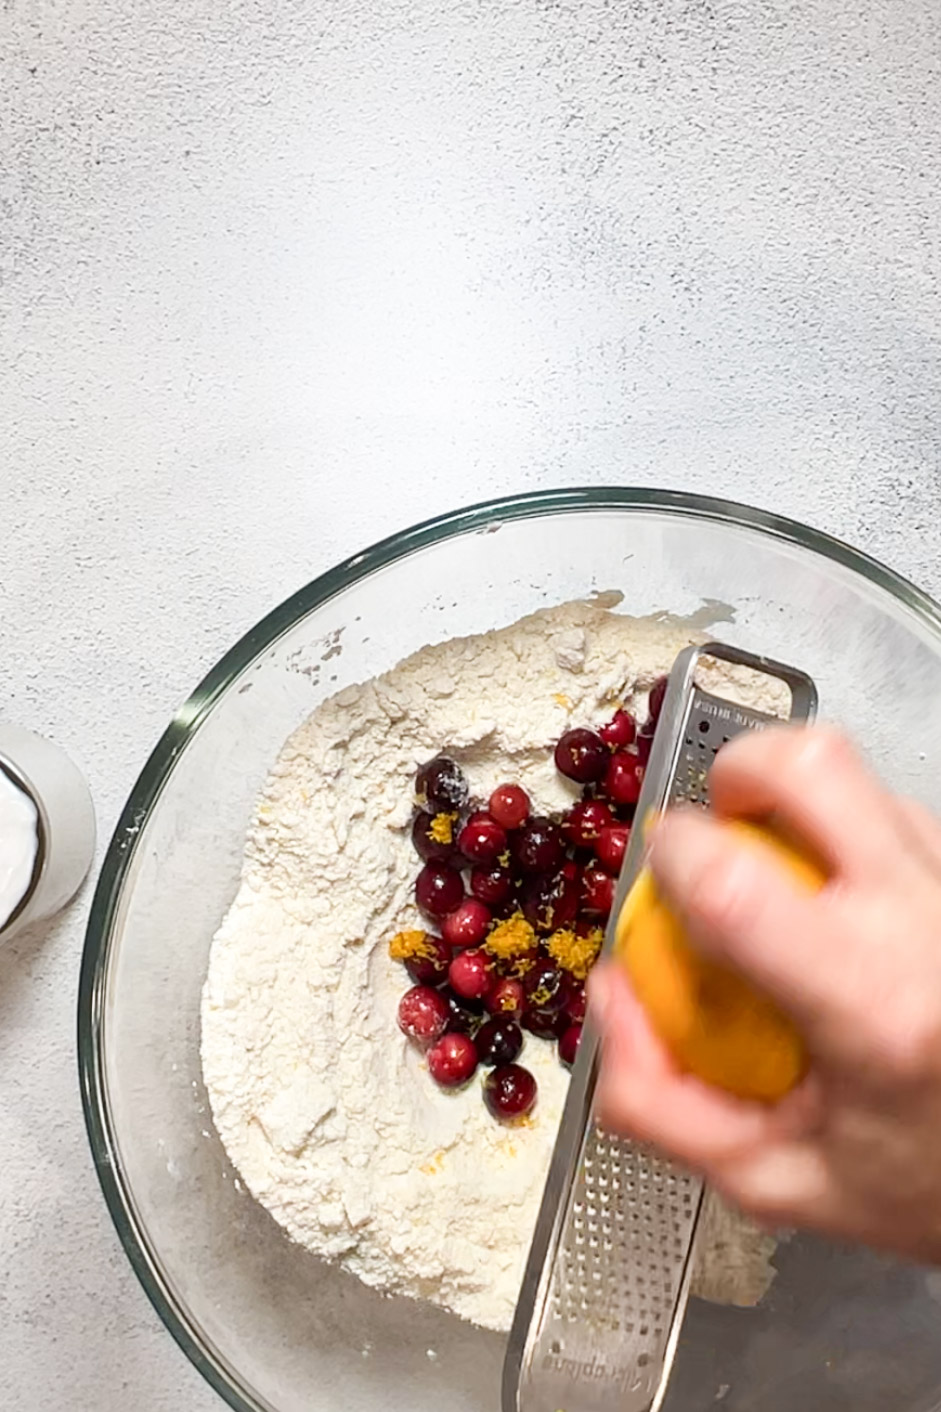 A person preparing vegan cranberry orange scones by sifting flour and cranberries into a bowl.